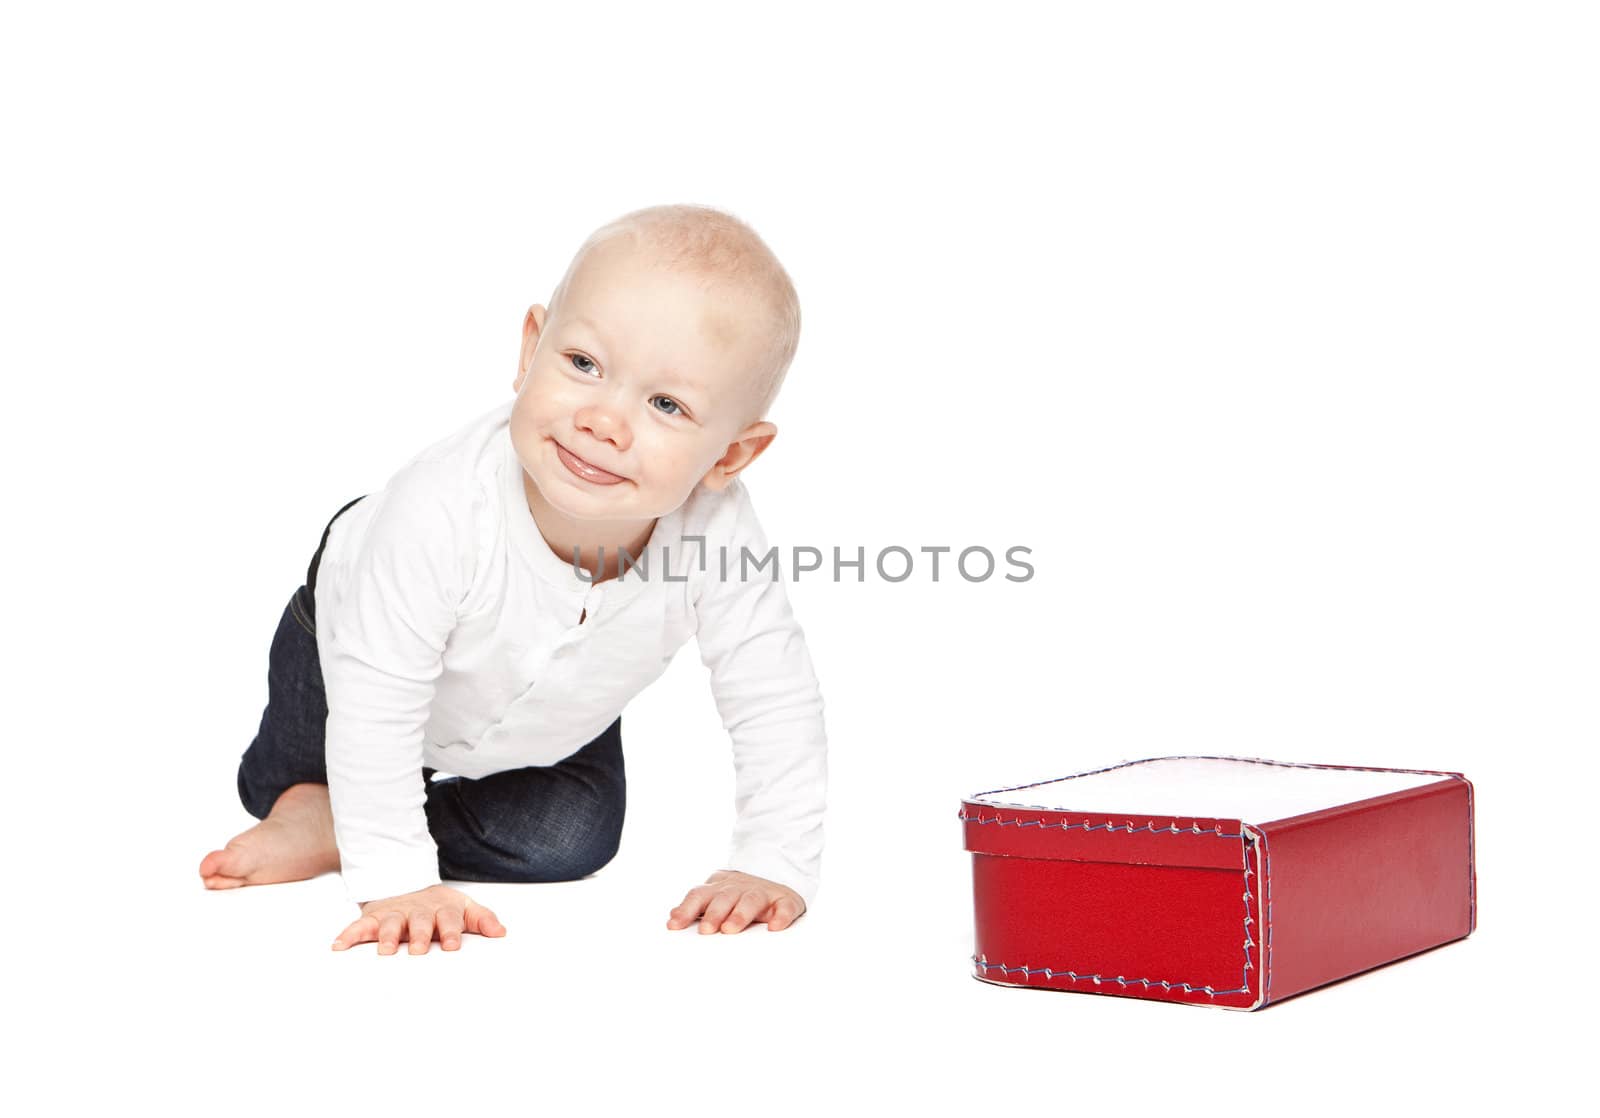 A boy and his red lunchbox by gemenacom